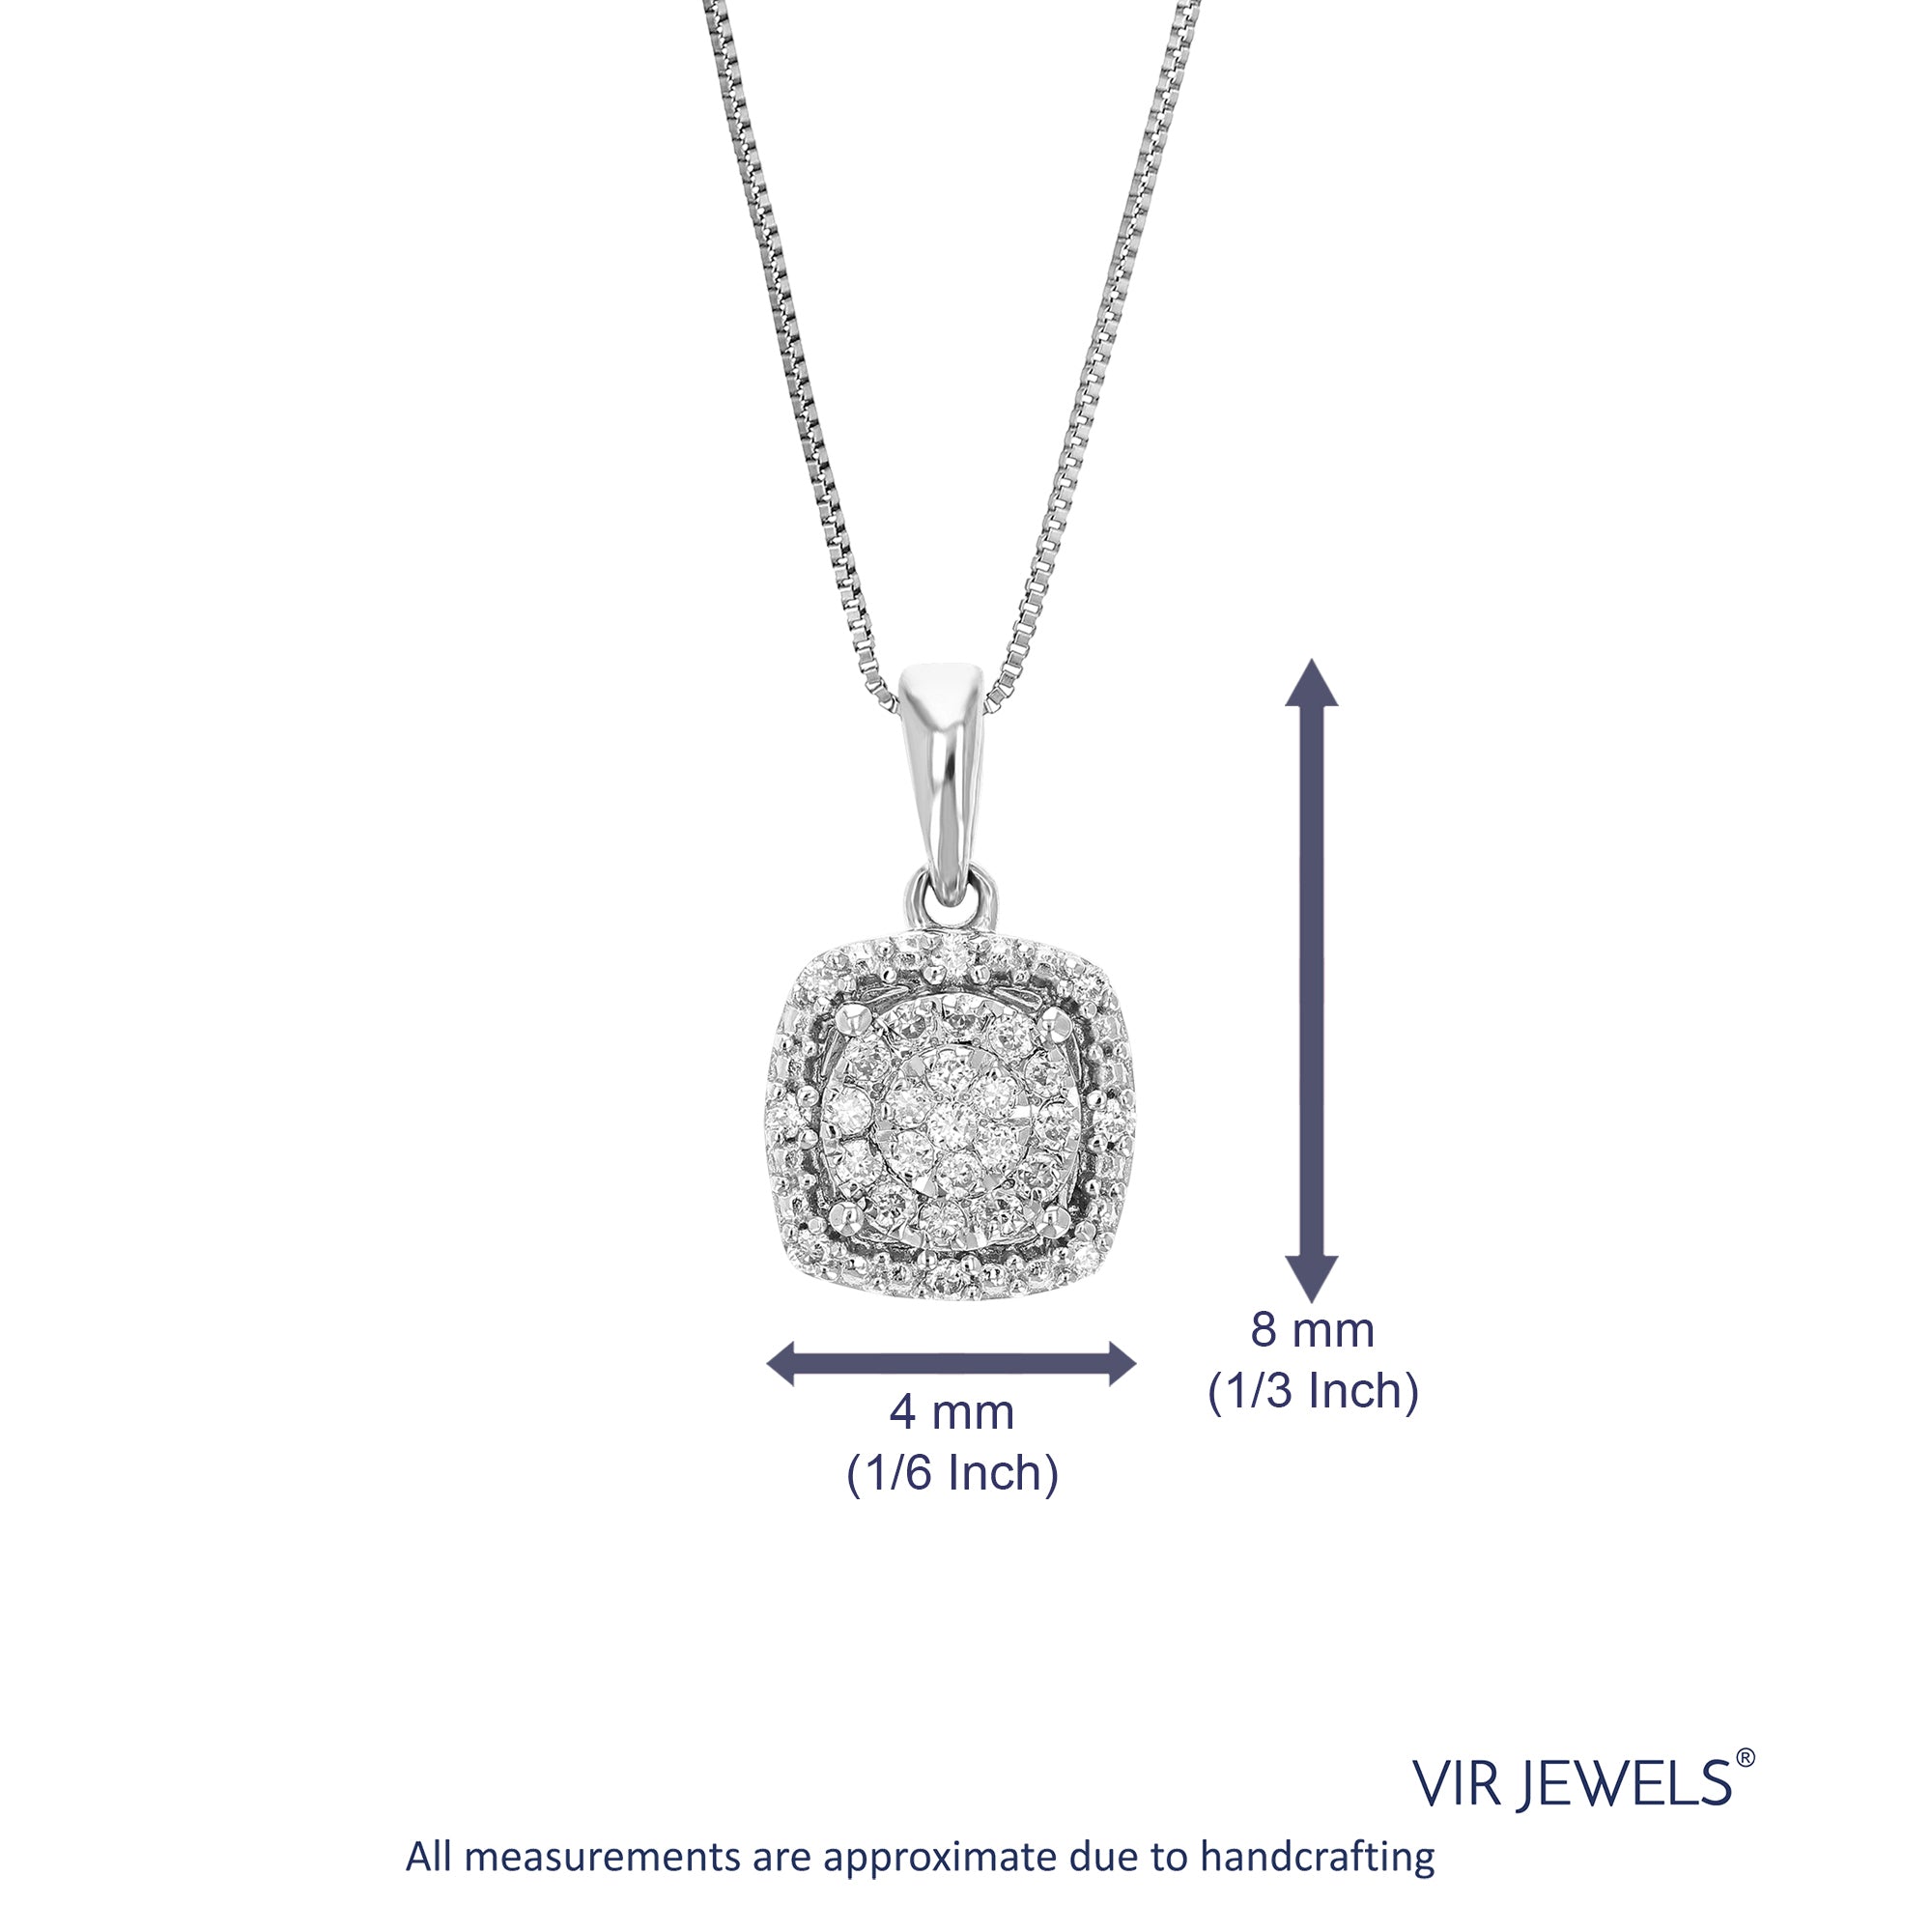 1/12 cttw Diamond Pendant Necklace for Women, Lab Grown Diamond Square Pendant Necklace in .925 Sterling Silver with Chain, Size 1/3 Inch